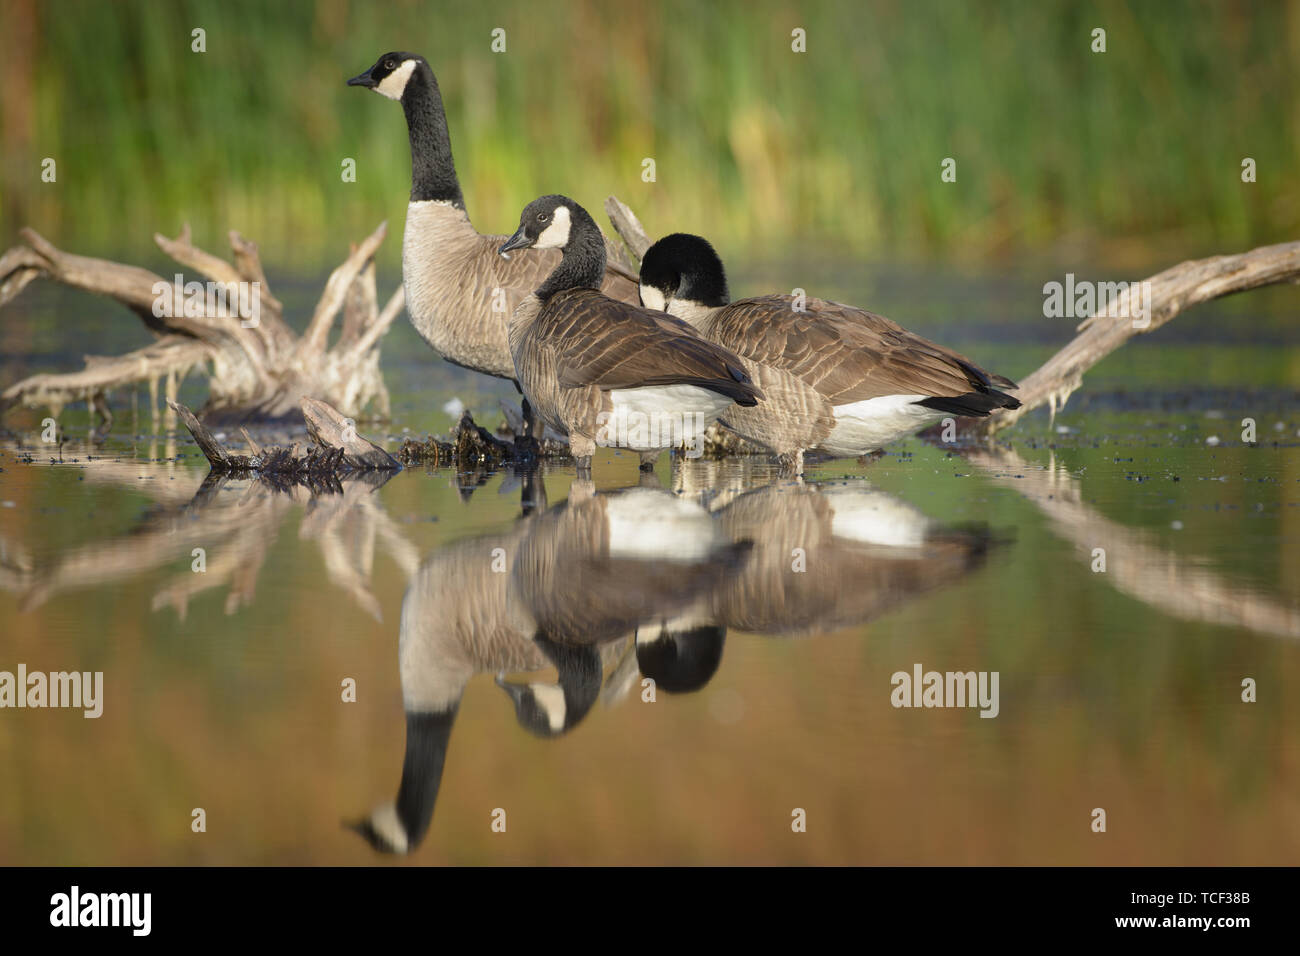 Thre canadian geese wading through shallow water. Stock Photo